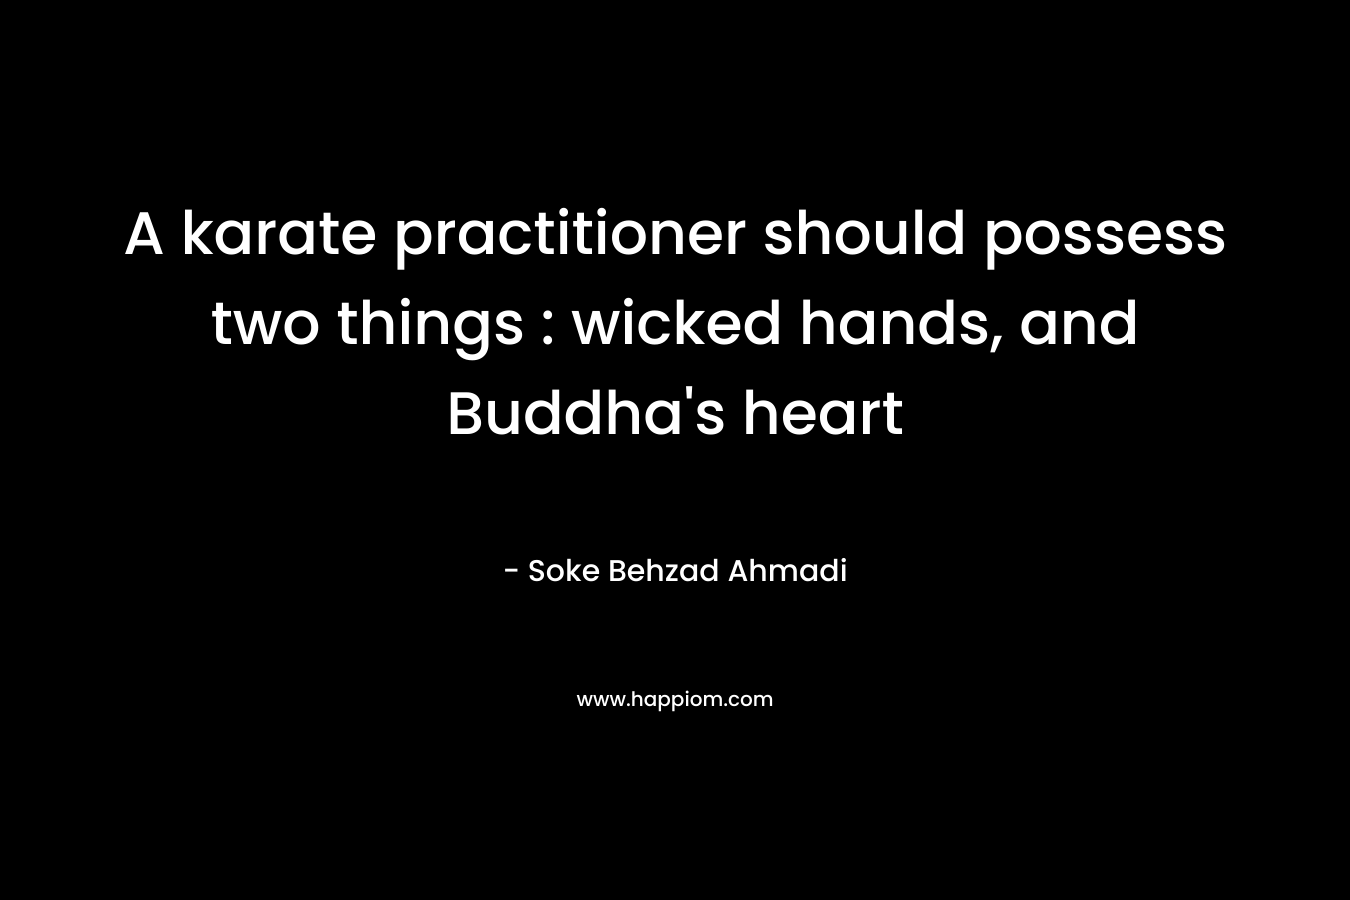 A karate practitioner should possess two things : wicked hands, and Buddha's heart